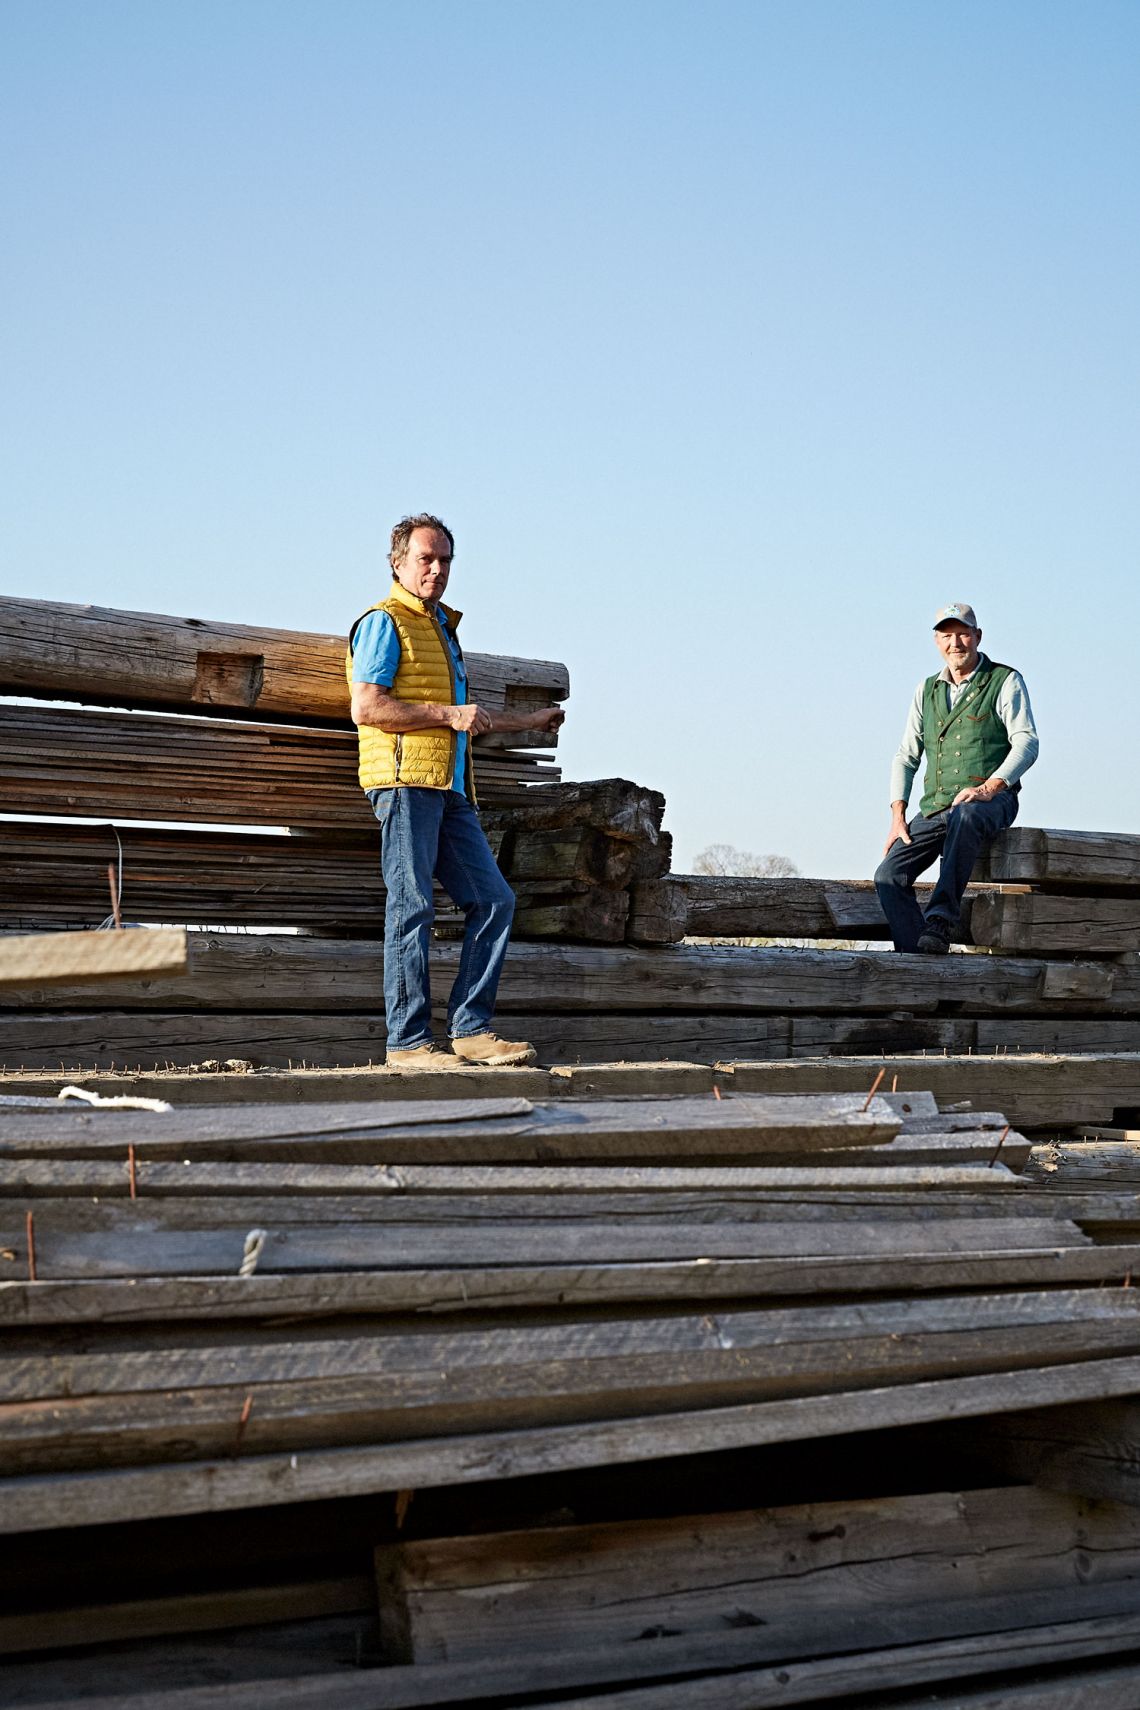 Anderl and Karl-Michael Friedinger stand on wooden boards at a construction site